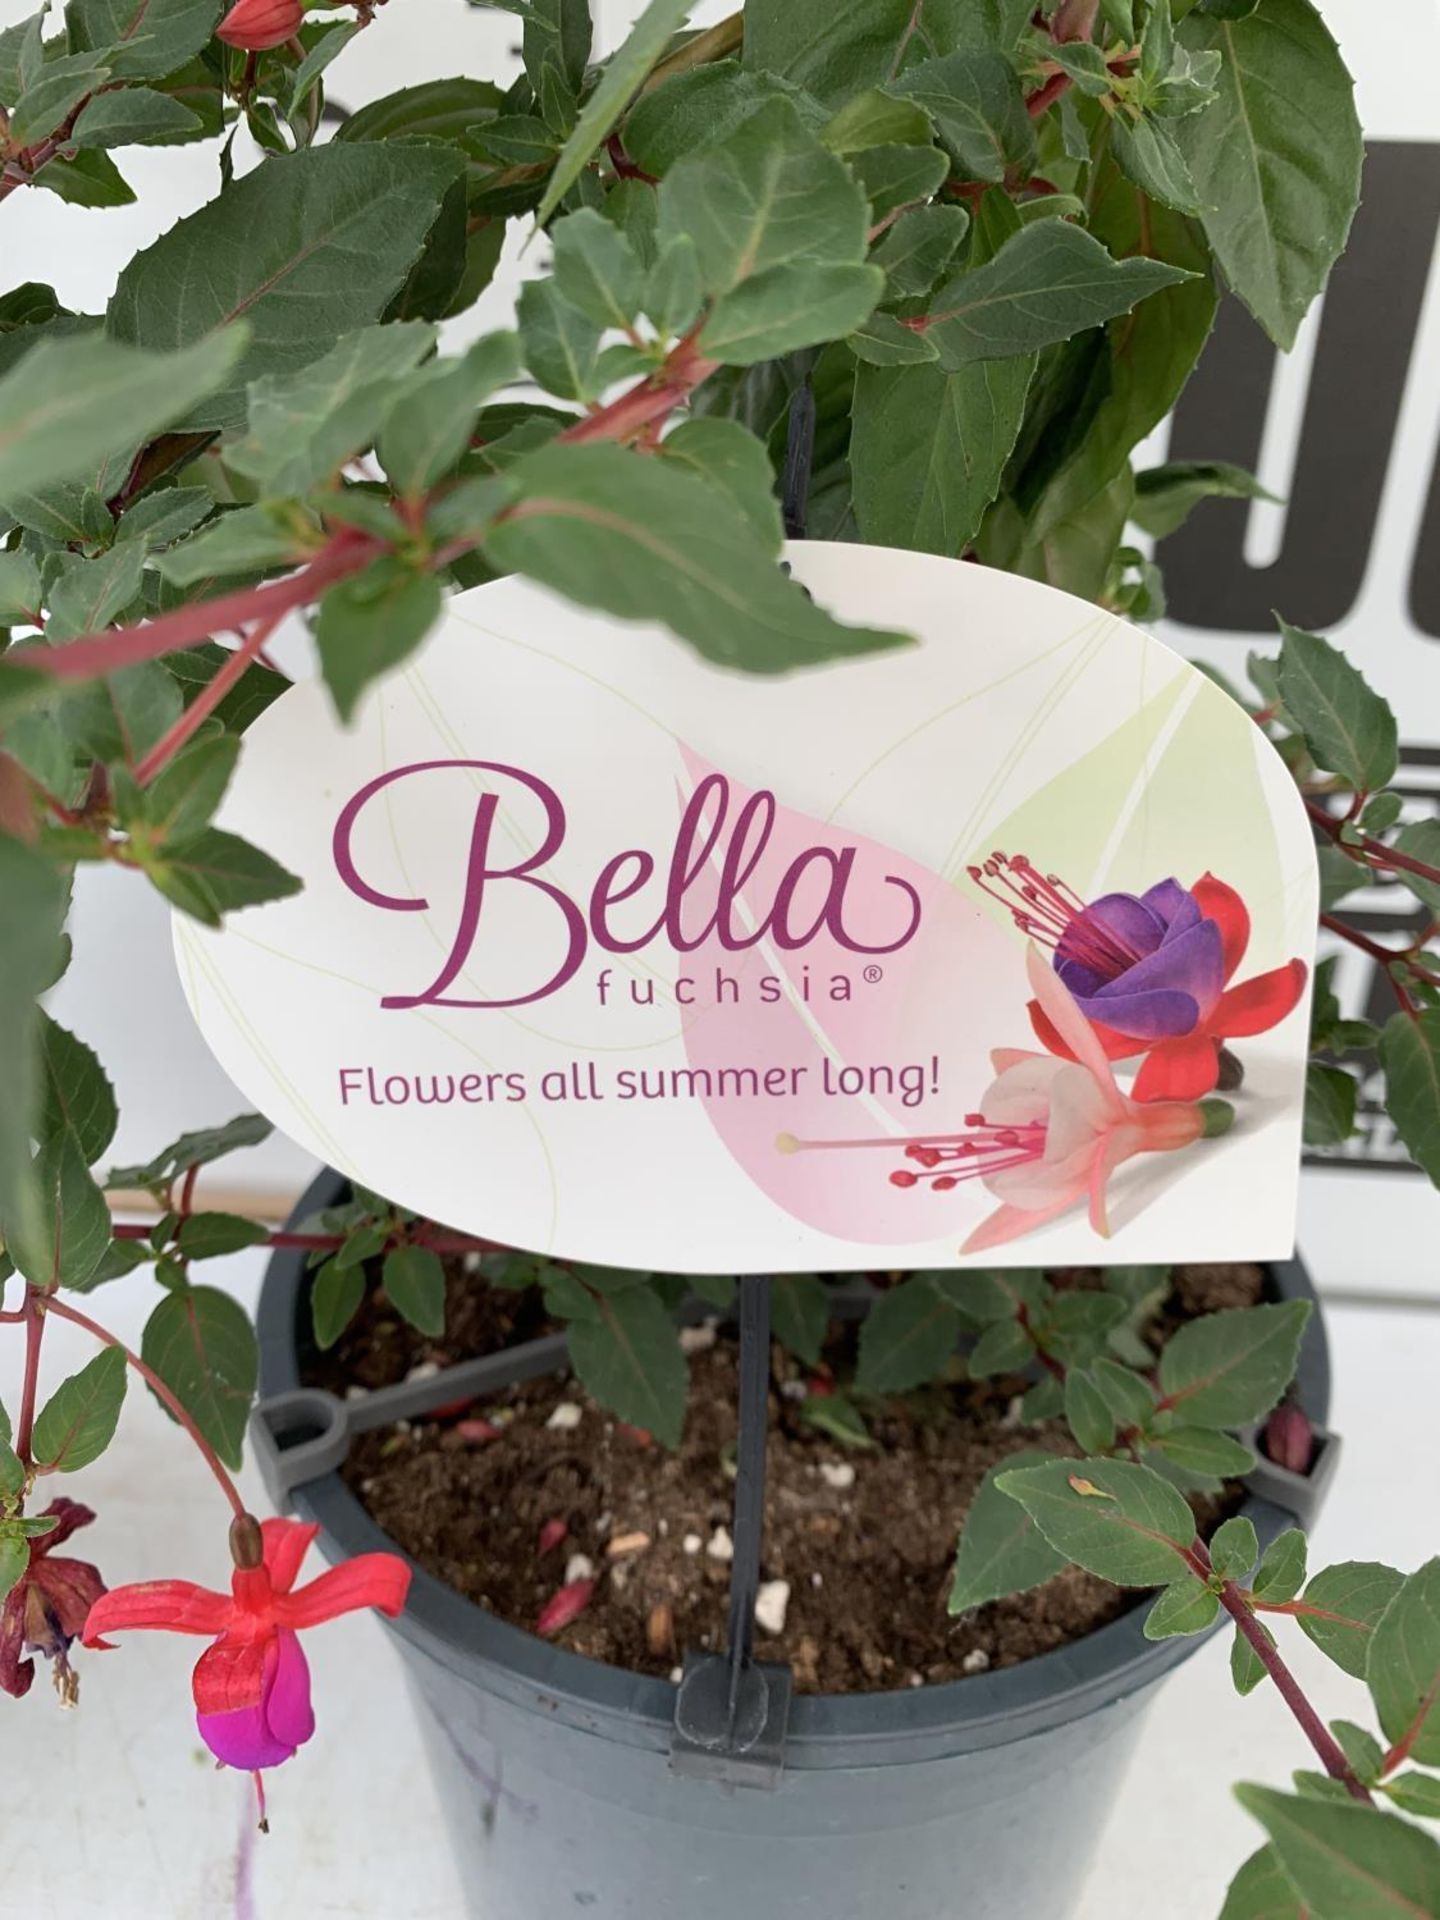 TWO BELLA STANDARD FUCHSIA IN A 3 LTR POTS 70CM -80CM TALL TO BE SOLD FOR THE TWO PLUS VAT - Image 8 of 8